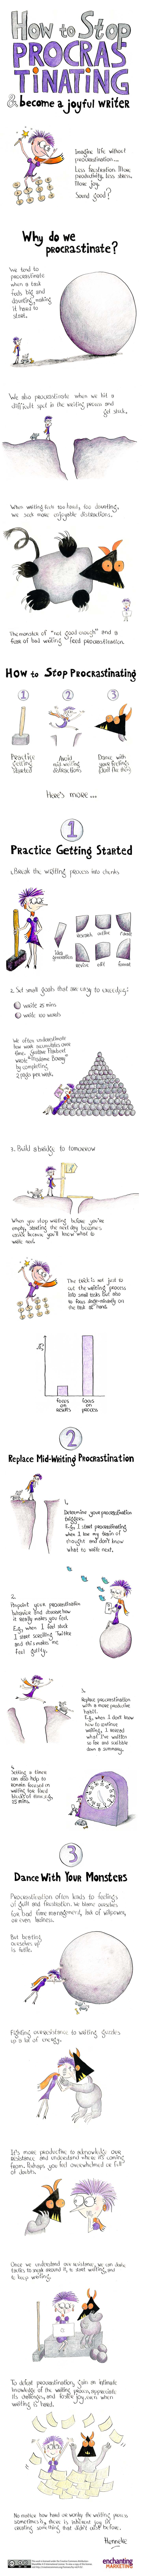 How to Stop Procrastinating and Become a Joyful Writer [Infographic]